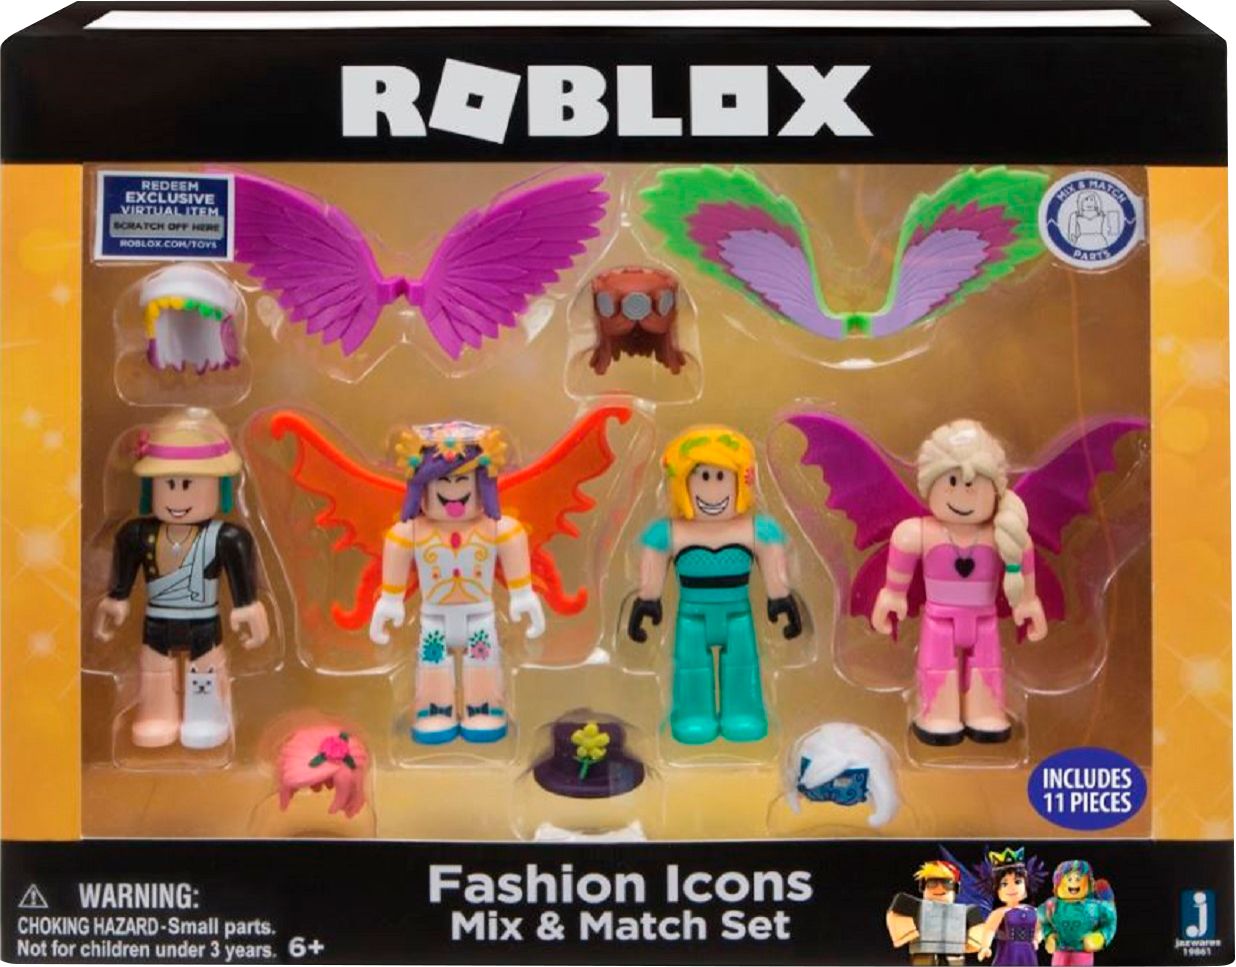 Best Buy Roblox Celebrity Mix Match Set Styles May Vary 19860 - roblox mix and match set